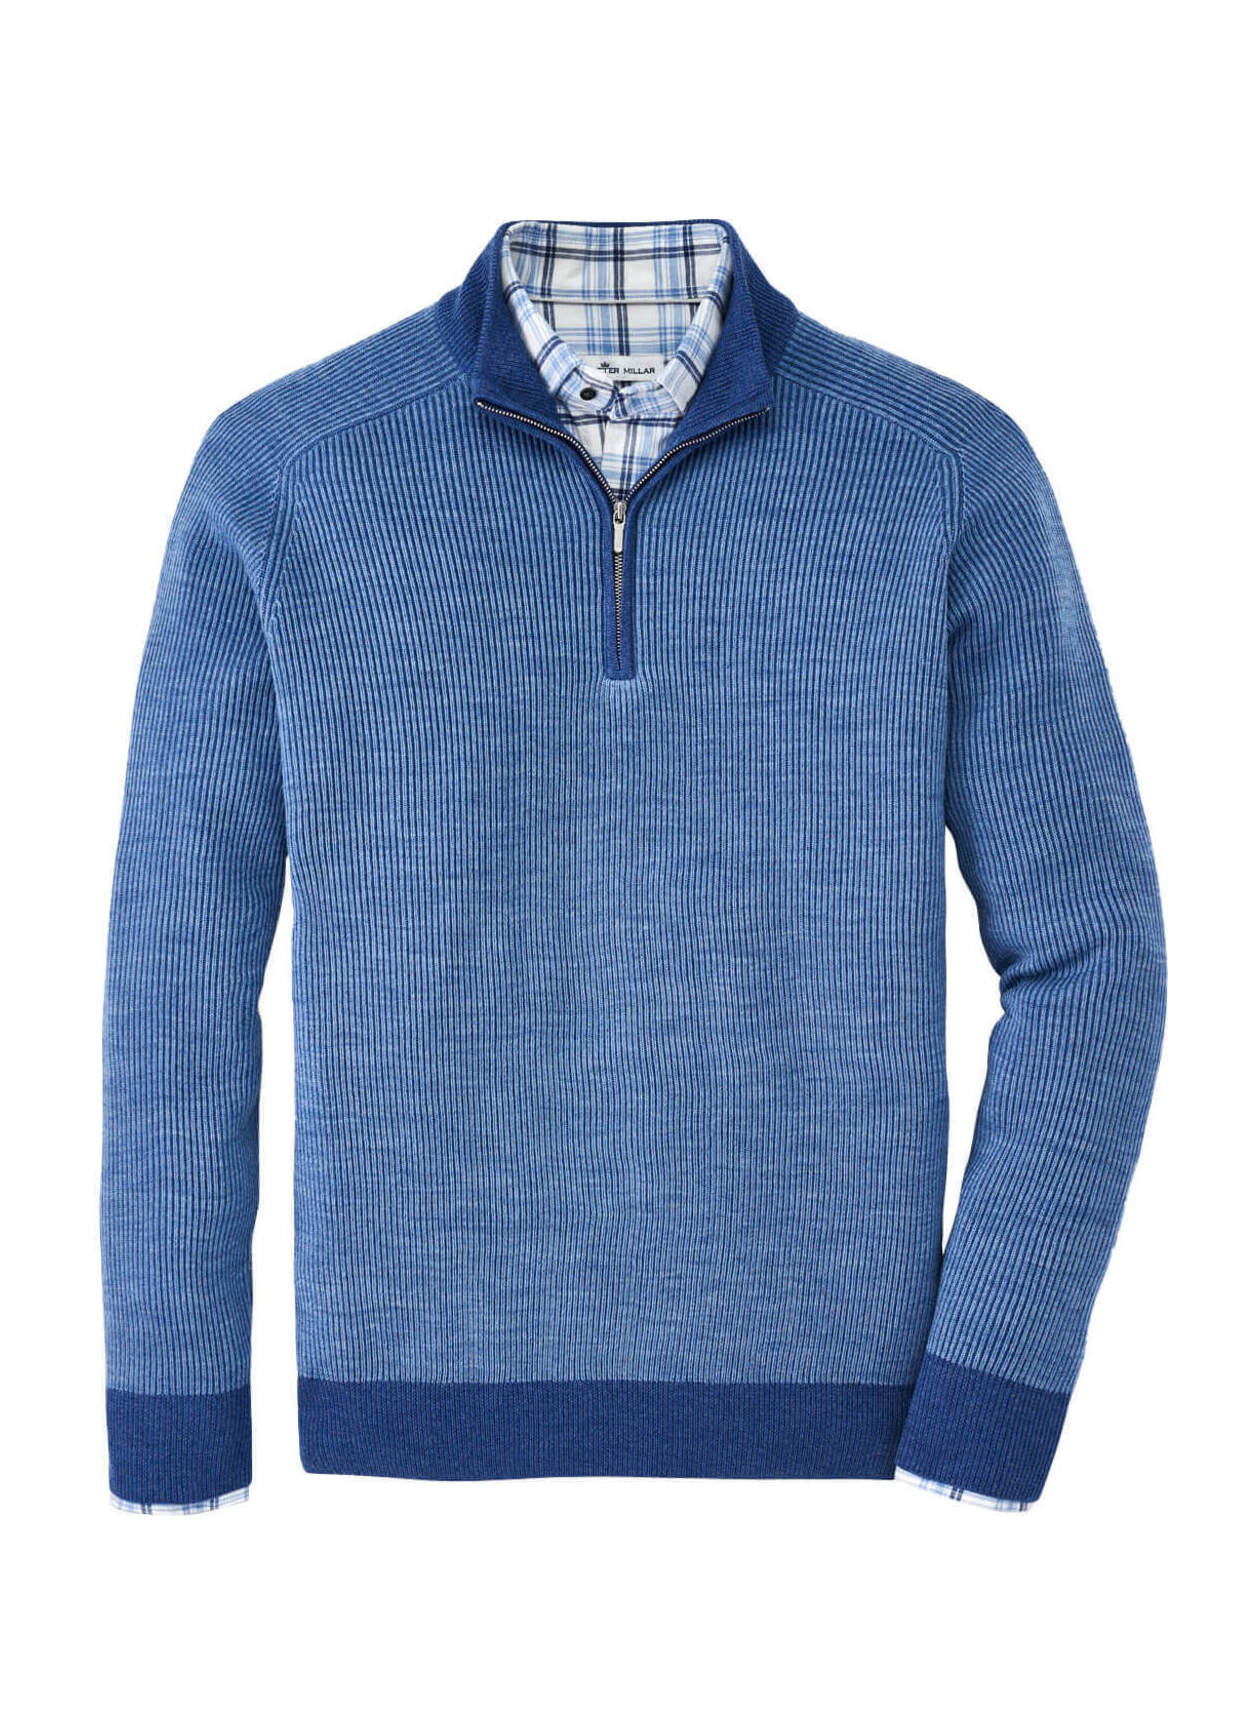 Peter Storm sweaters?  Men's Clothing Forums